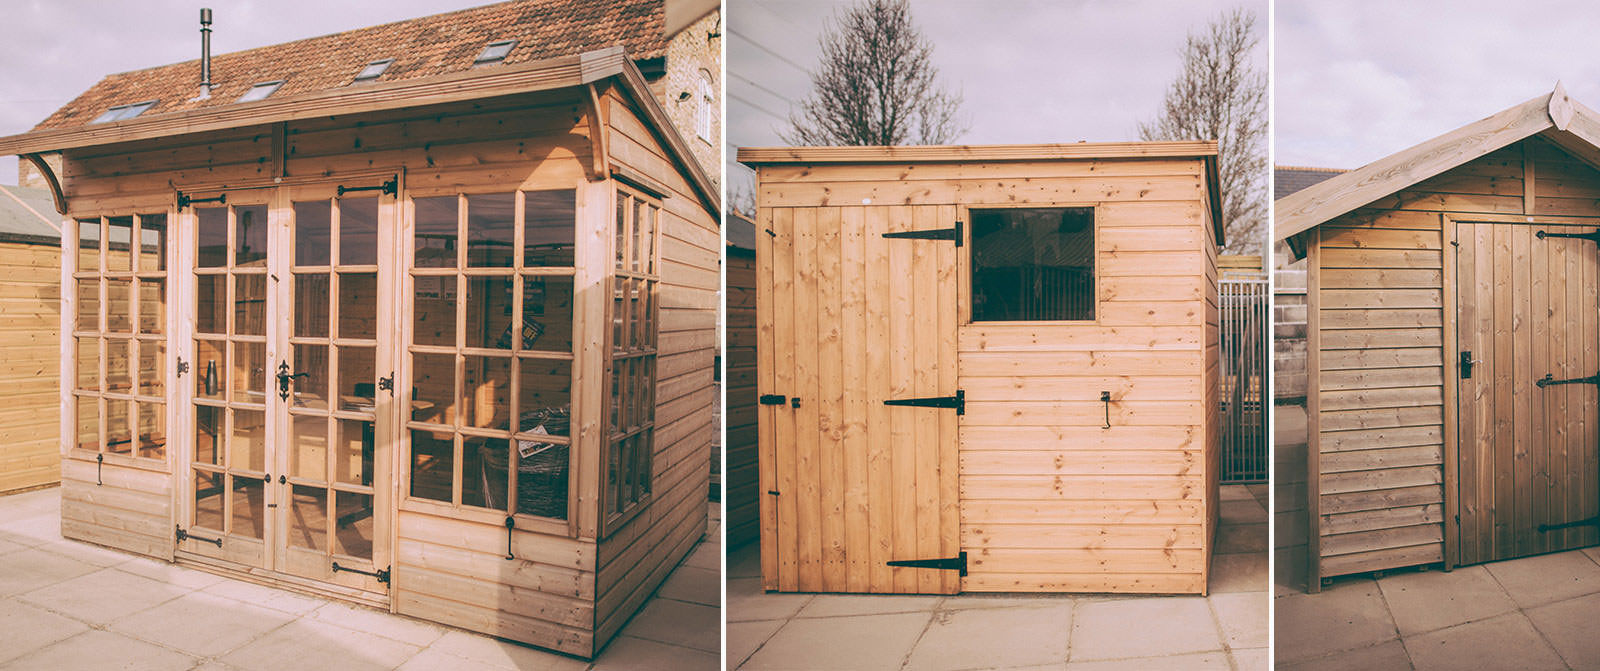 Garden sheds and stores